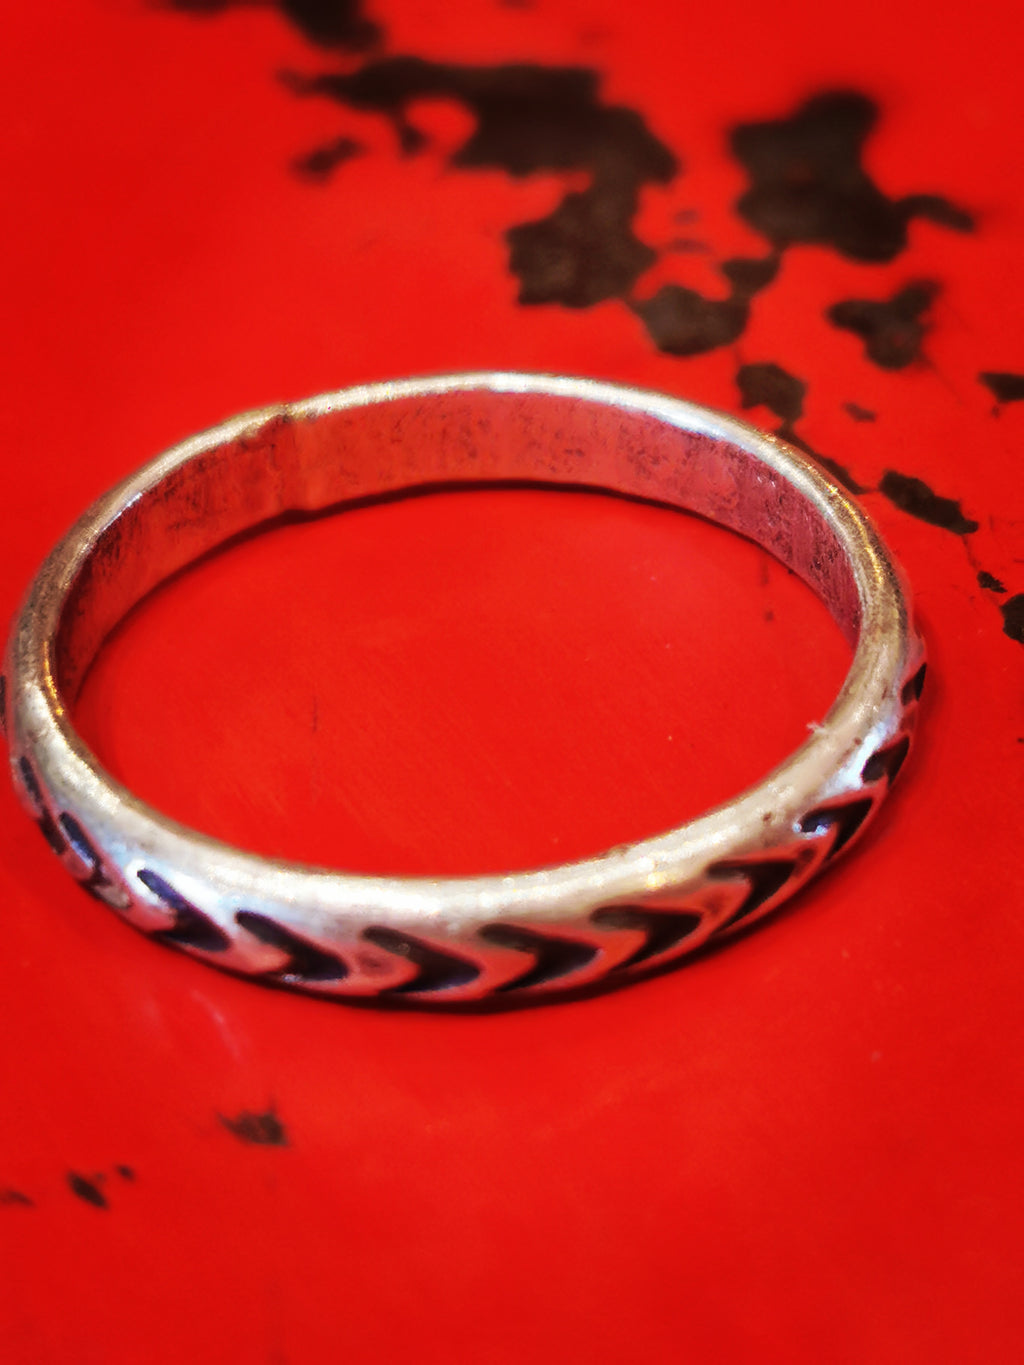 Karen hill tribe silver has a higher content of silver, at 99.5-99.9% compared with sterling silver at 92.5%. This allows the silver to wear and soften differently from standard sterling silver. Many of the Karen ring designs stack together beautifully. All pieces are hand made and hand finished using traditional methods.


 

An all time favourite design, not too chunky but still has a nice weight and fits almost as if they were made to be worn together with the profile and arrow rings.

